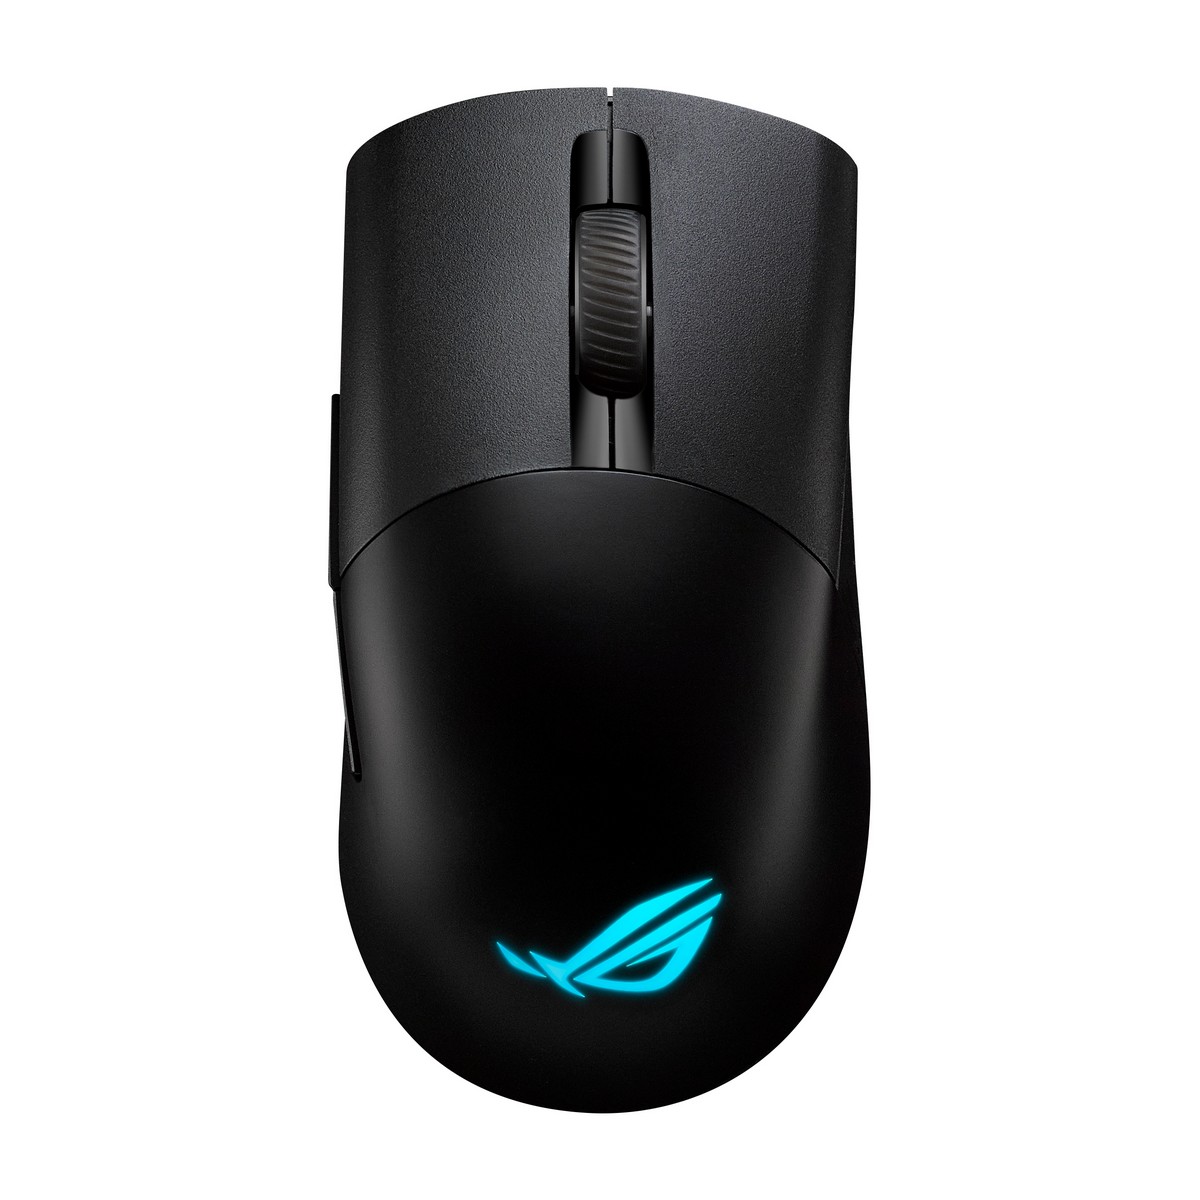 ASUS ROG Keris Wireless Aimpoint Wireless Gaming Mouse - Black (90MP02V0-BMUA00)